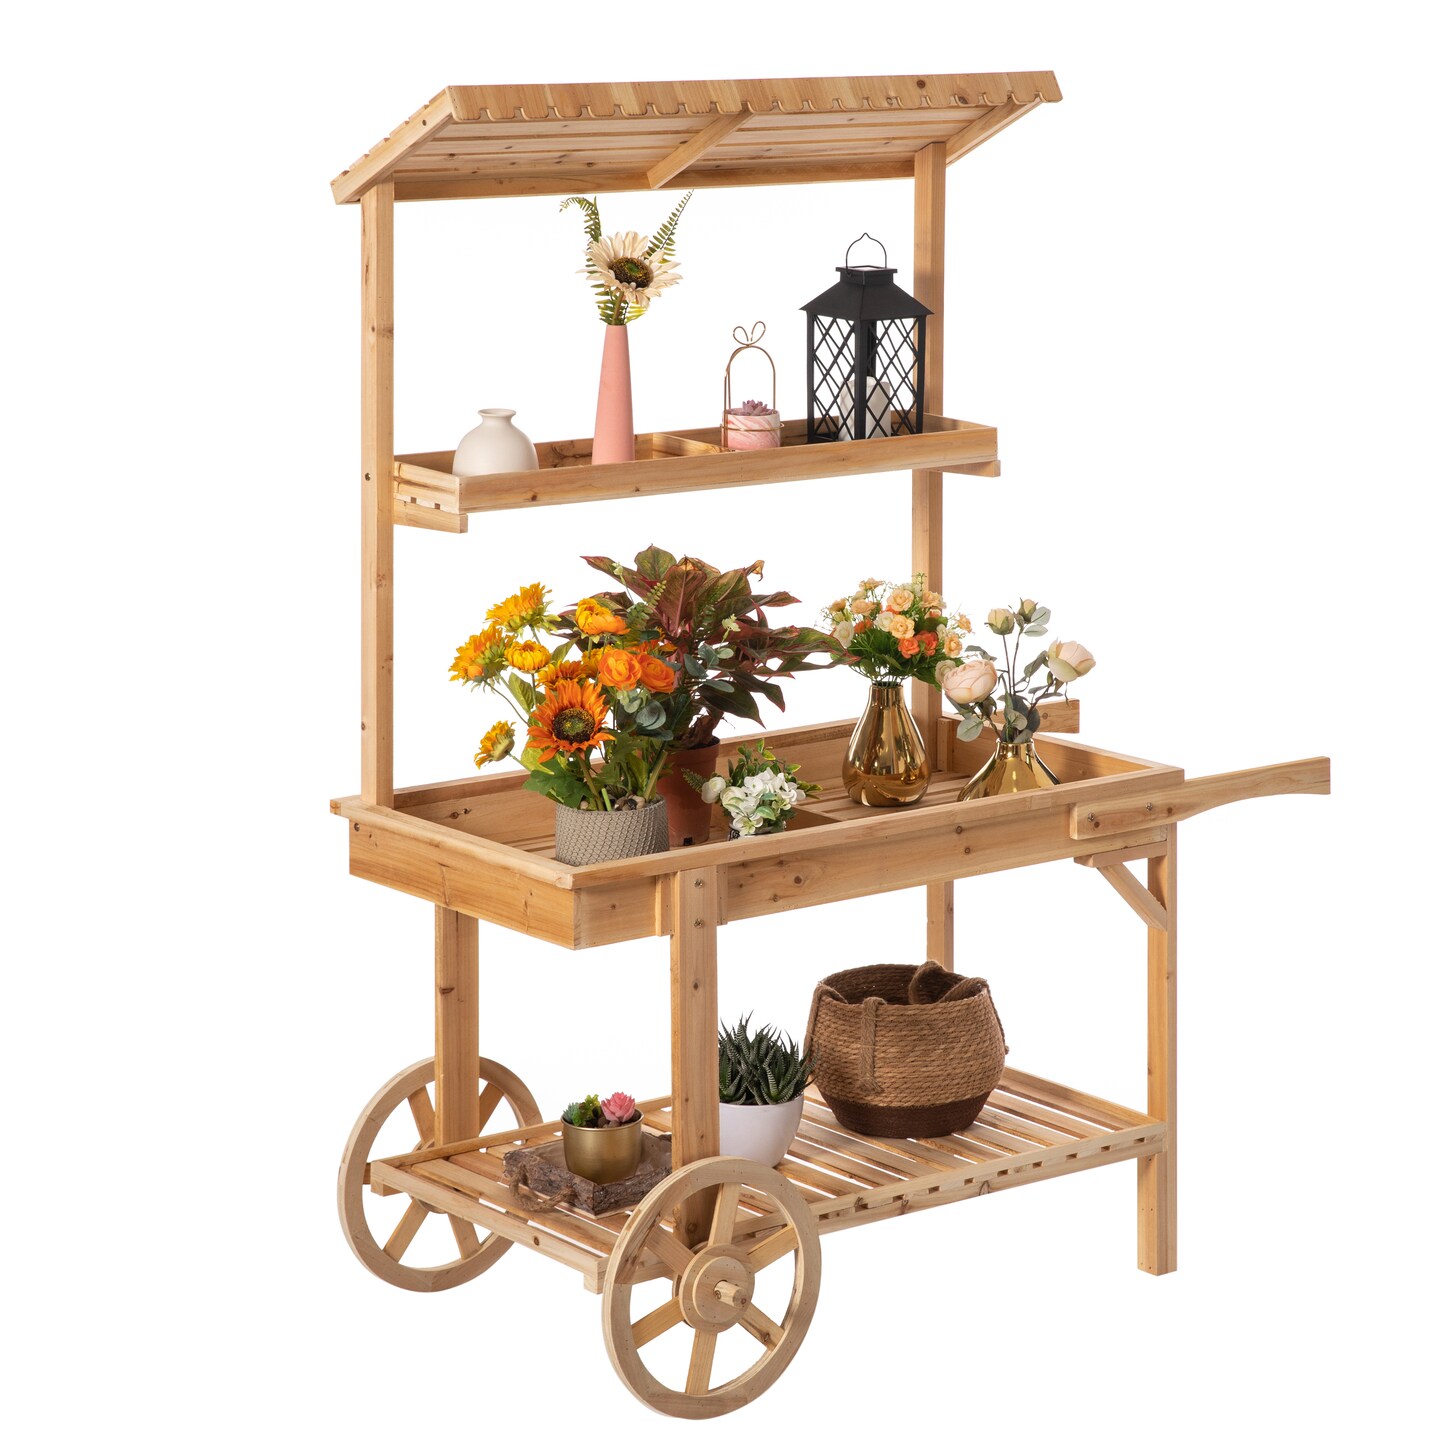 Antique Solid Wood Decor Display Rack Cart Wood Plant Stands with Wheels for Decor Display | 2 Wheeled Wood Wagon with Shelves for Plants and More